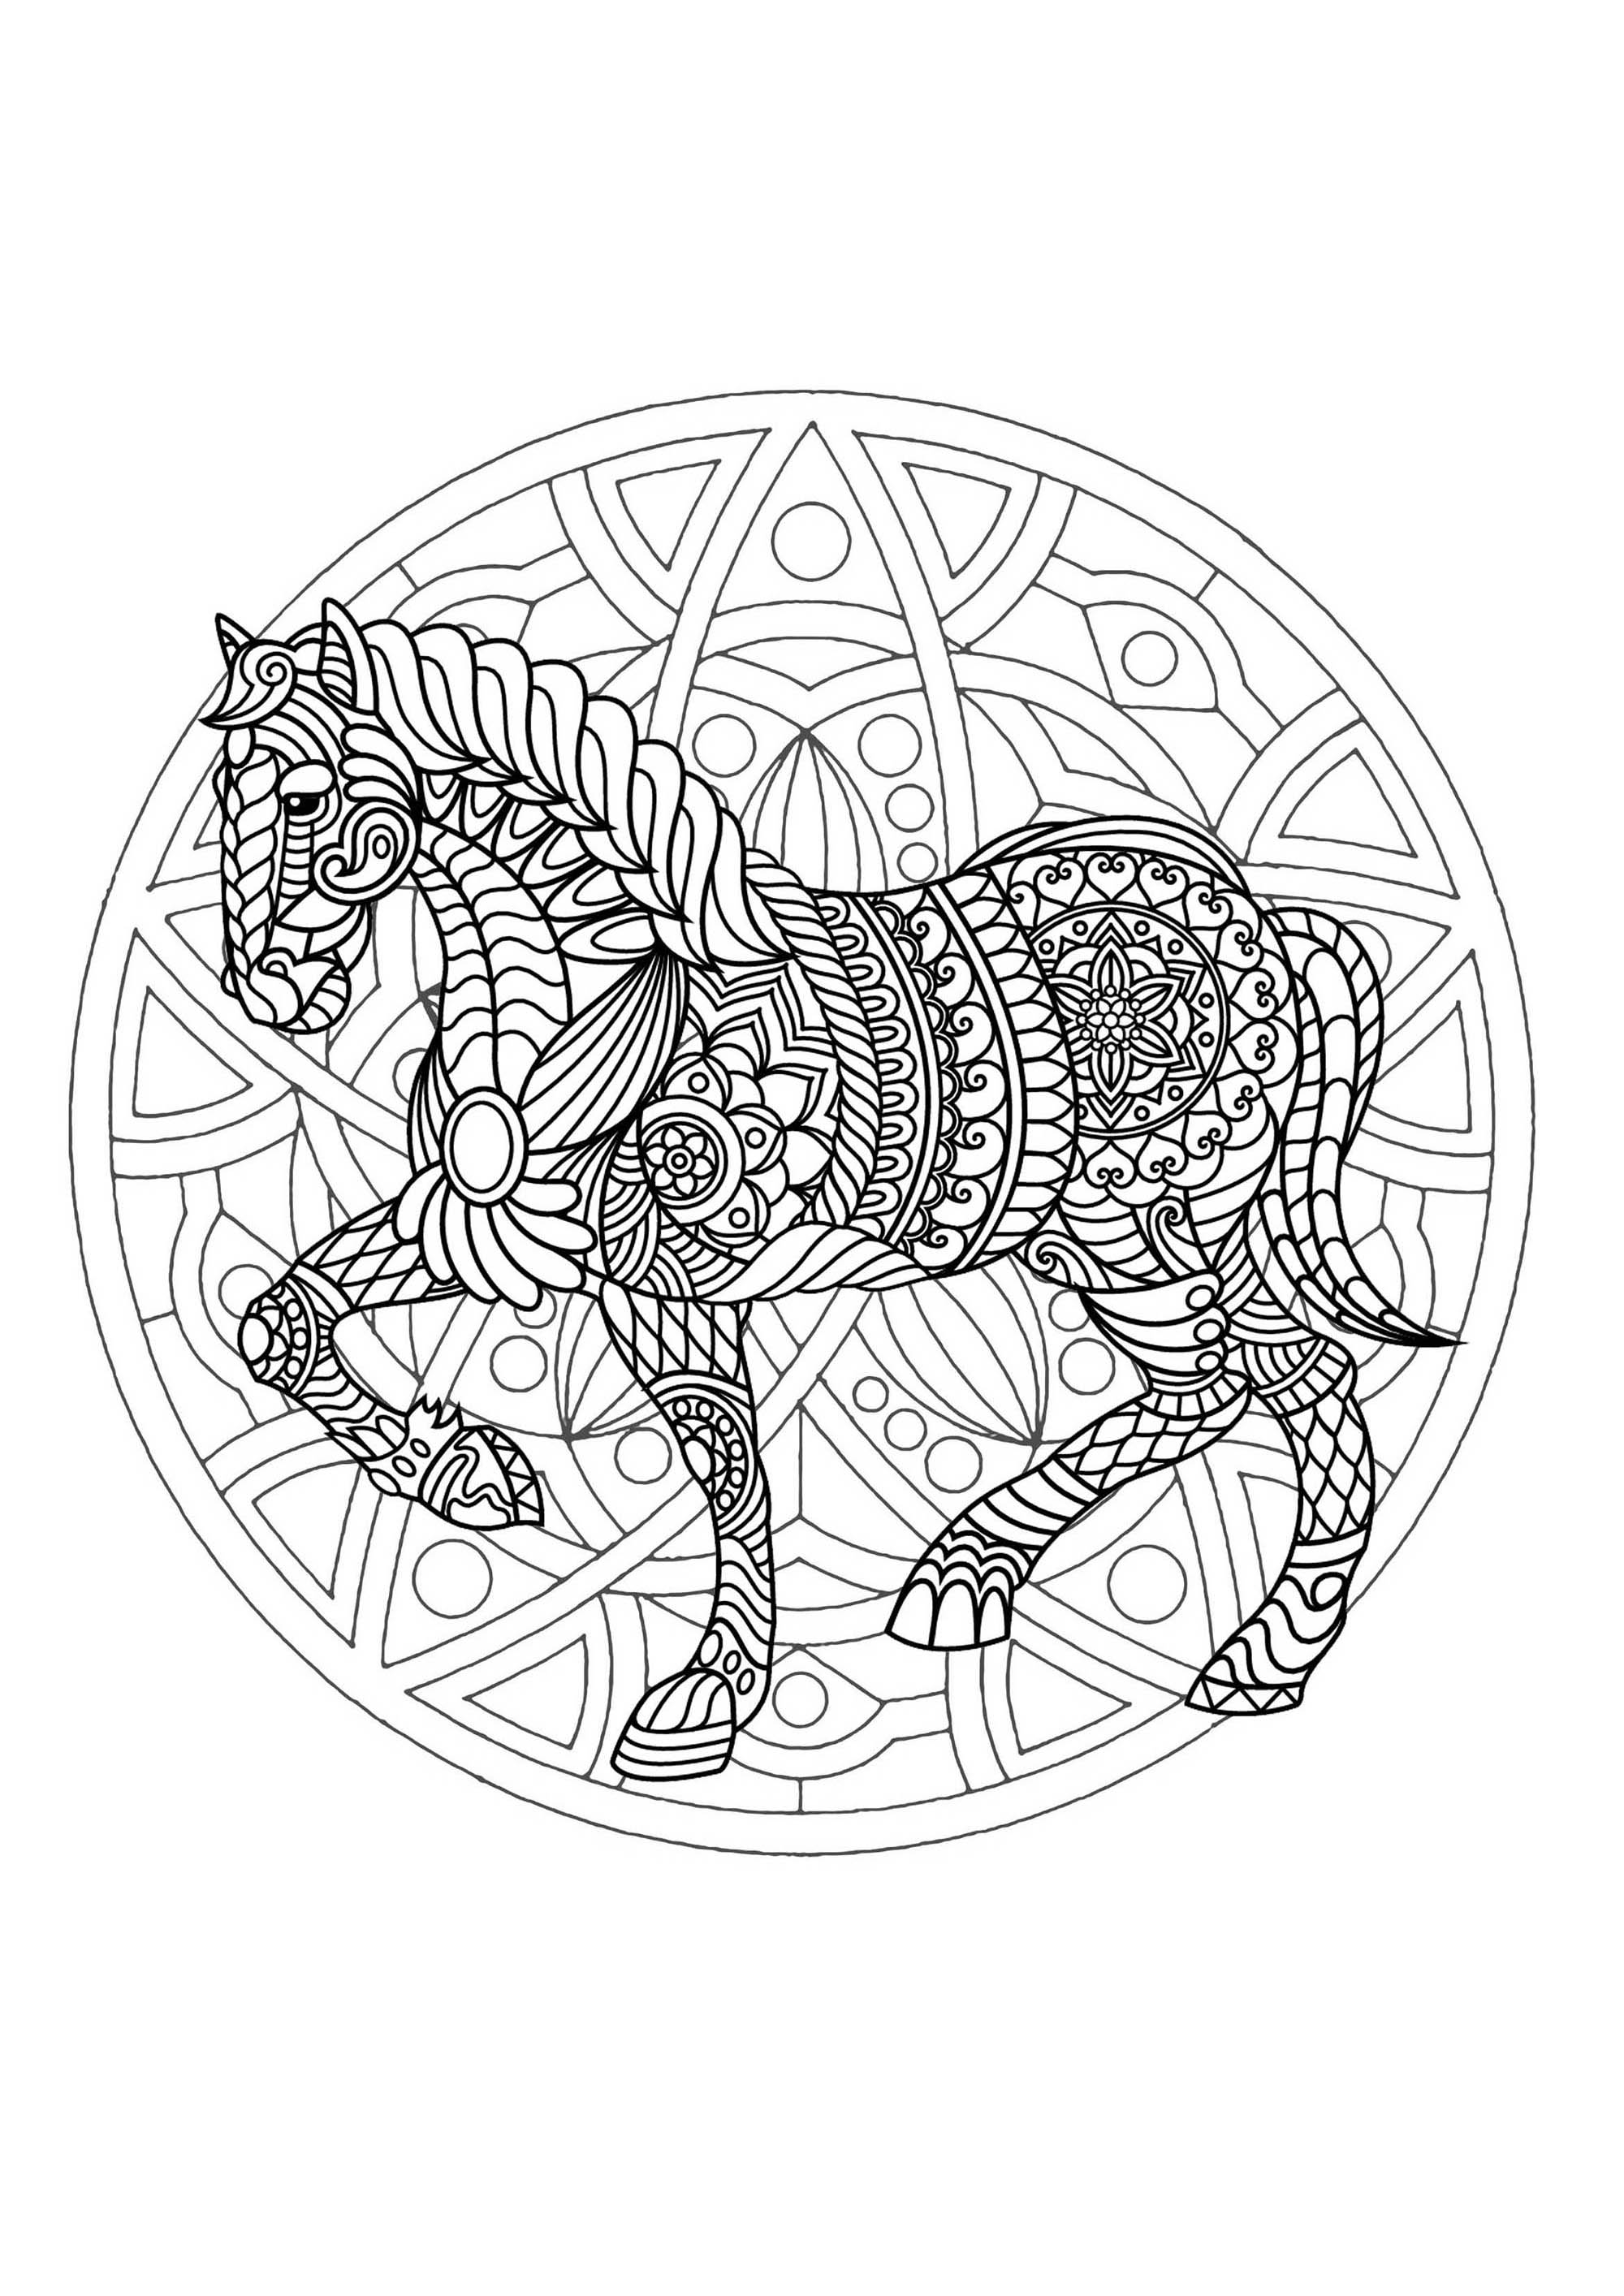 A beautiful Mandala coloring page with a beautiful horse, of great quality and originality. It's up to you to choose the most appropriate colors. You must clear your mind and allow yourself to forget all your worries and responsibilities.